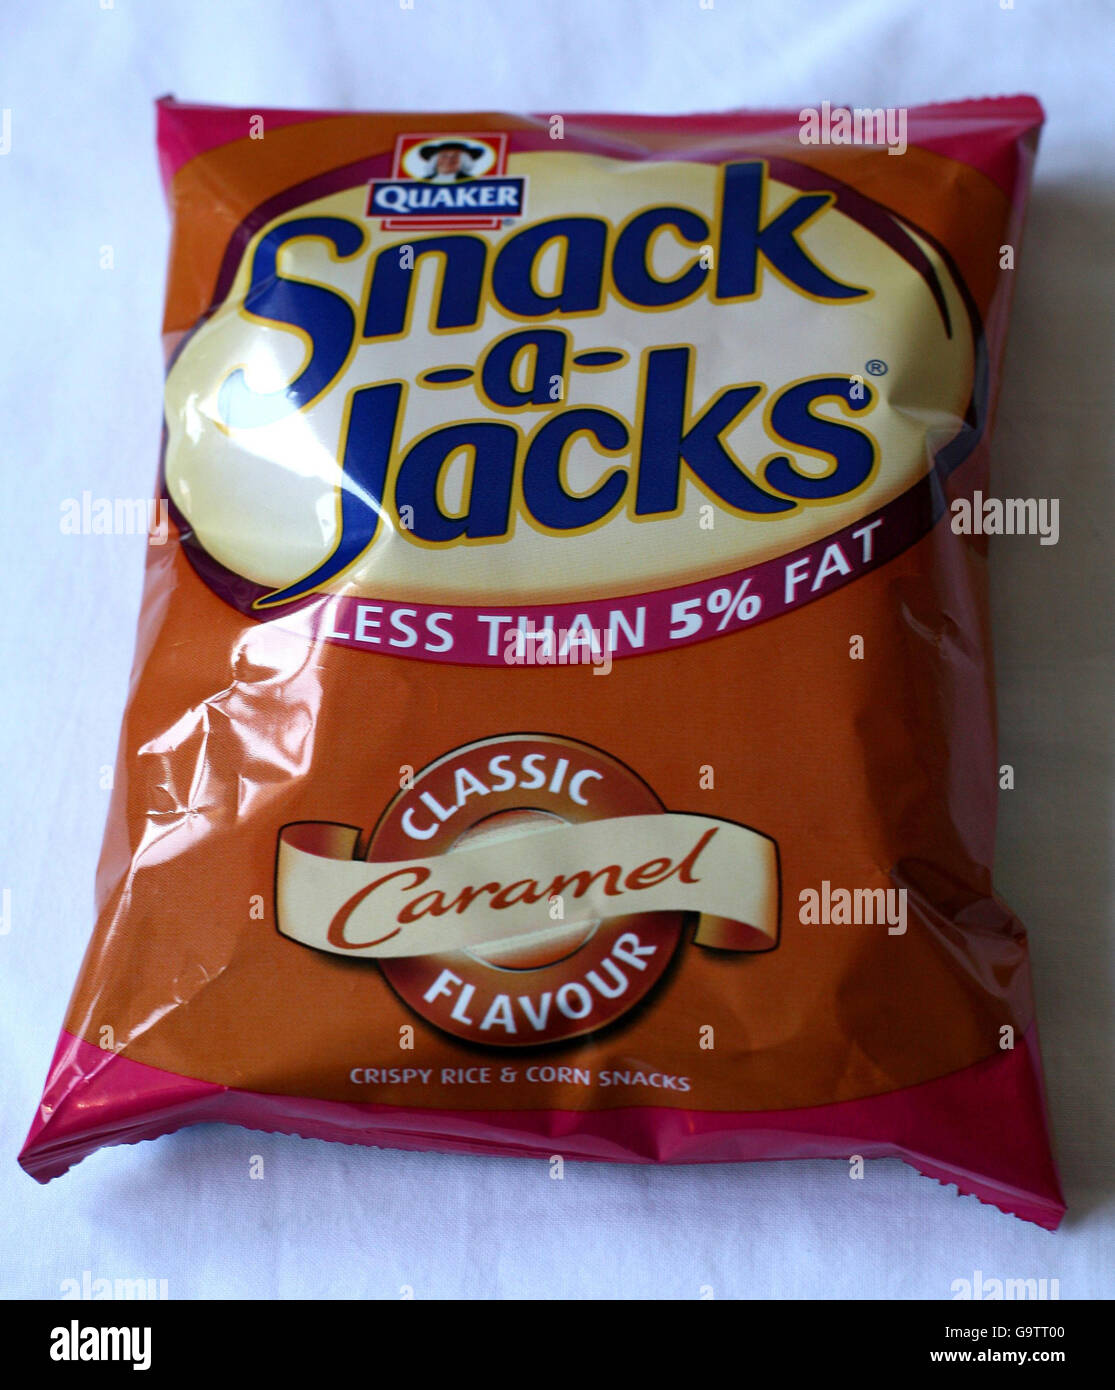 Packet of low fat Snack-a-Jacks which were found to have 28g of sugar per 100g in a new survey on sugar content in foods. Stock Photo